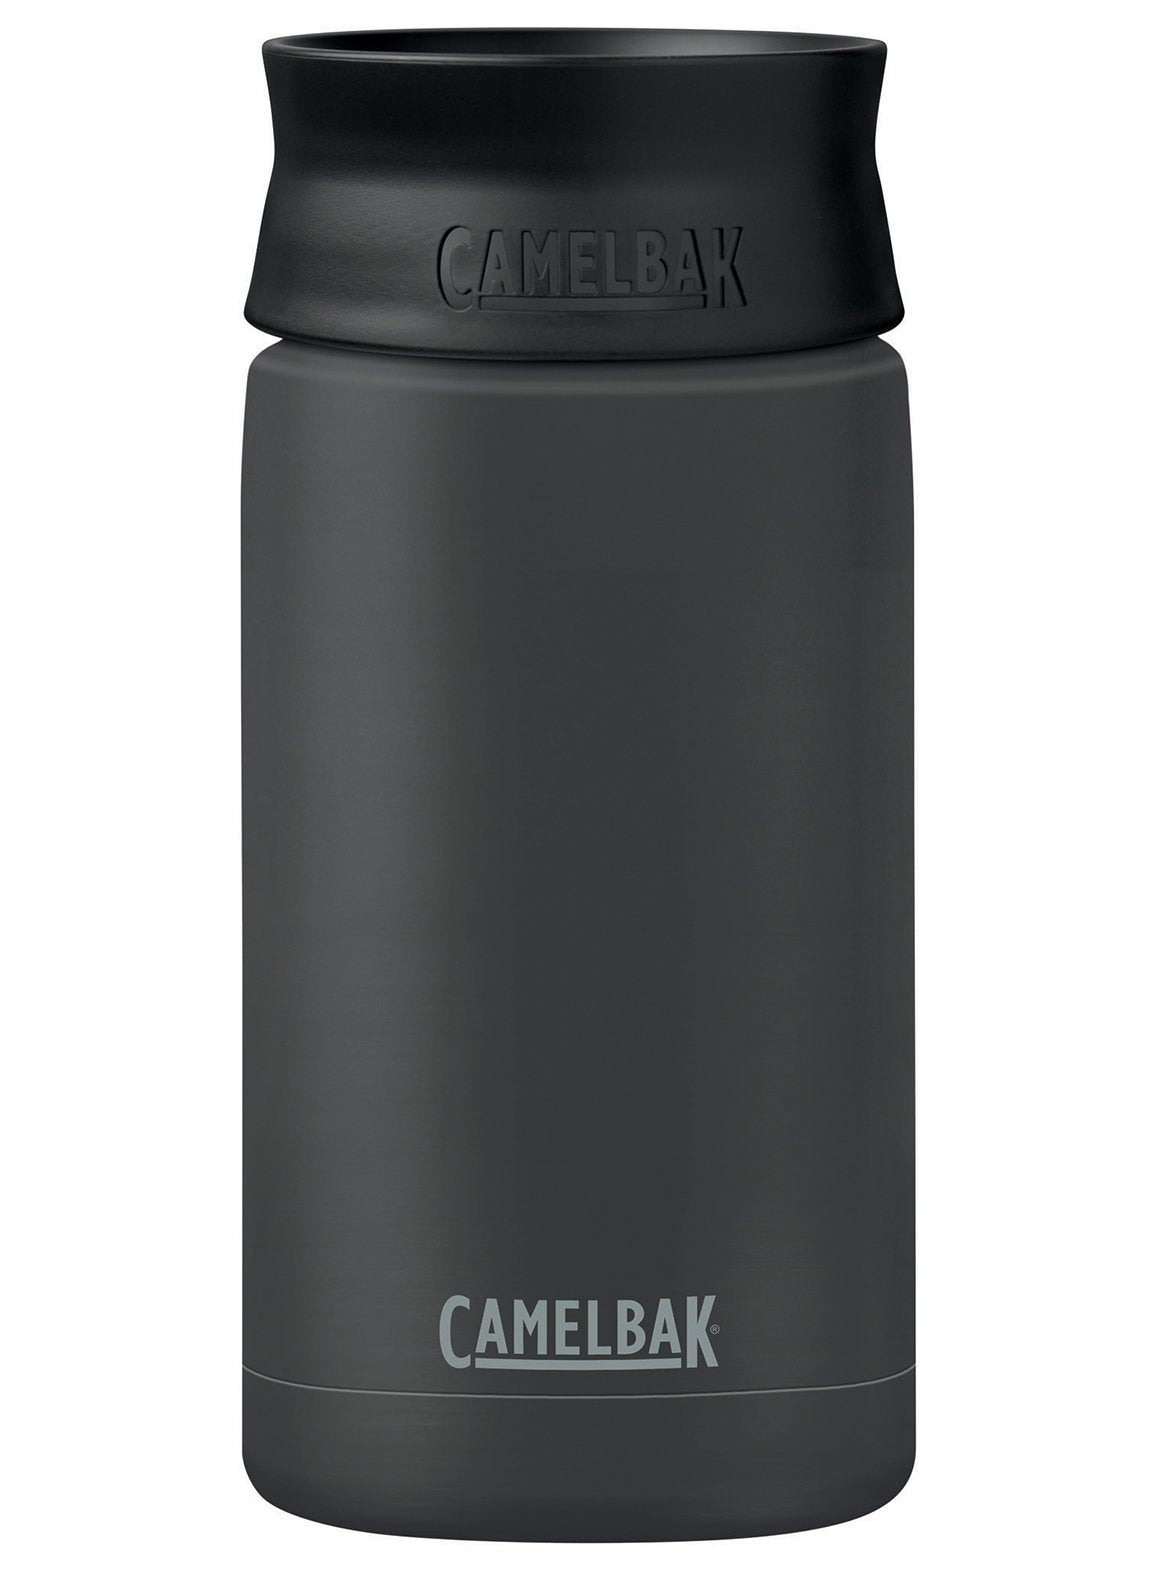 Camelbak NEW TOP the Hot Cap TESTED and REVIEWED 